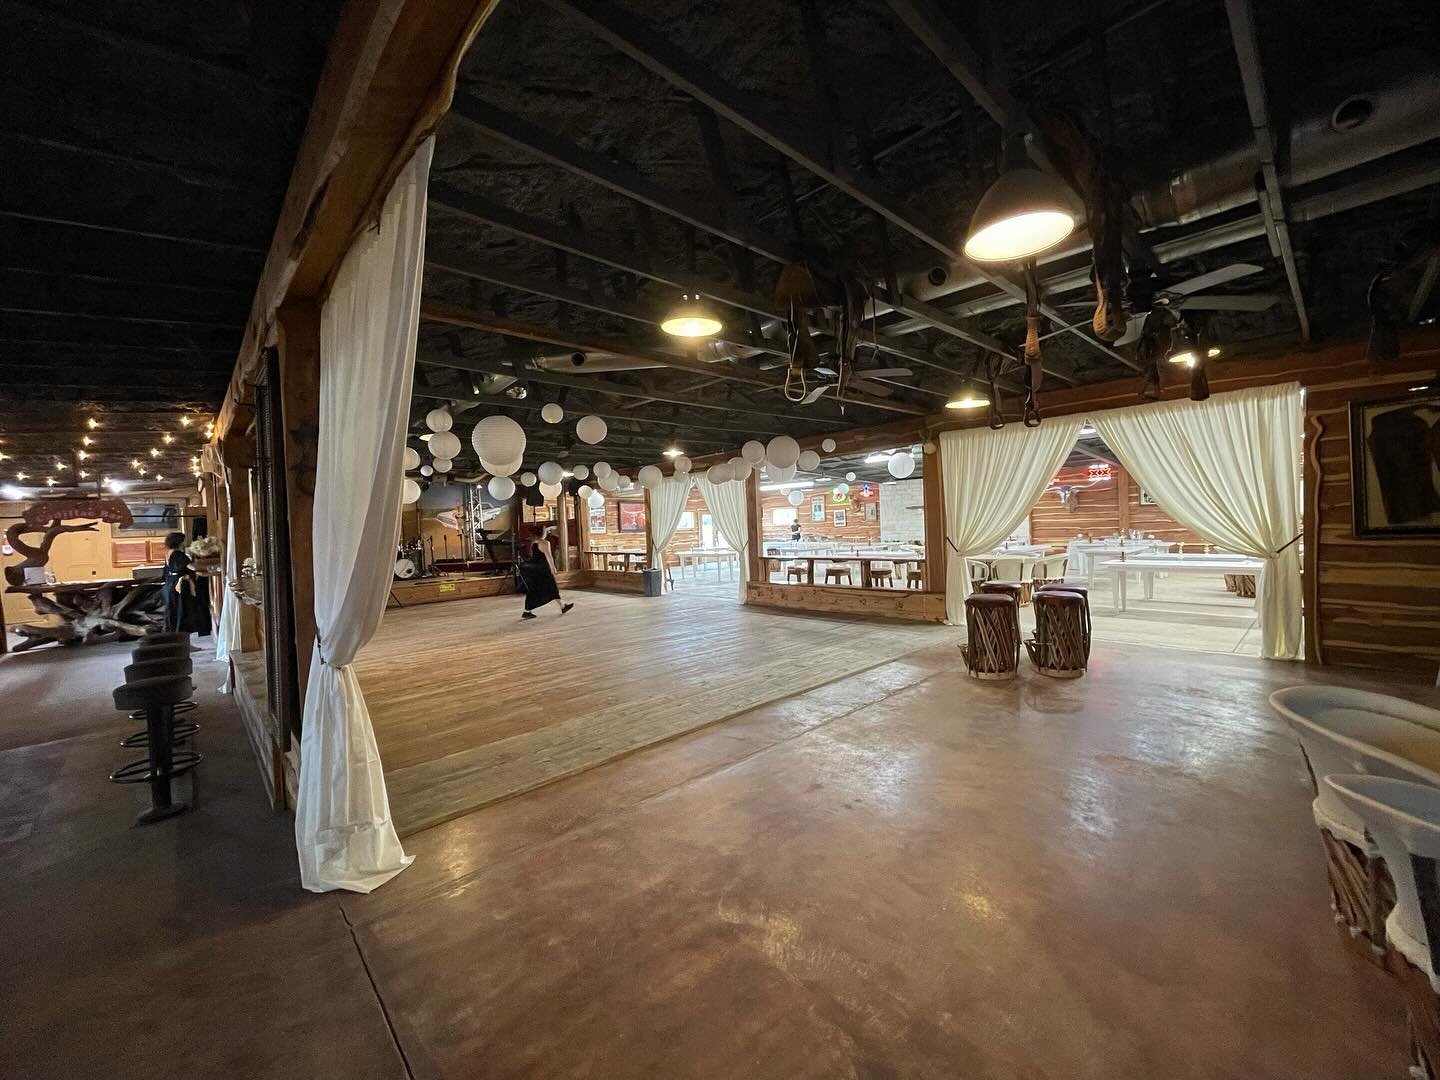 We&rsquo;re over here at the dance hall setting up for another private event this weekend&hellip; we can&rsquo;t share the photos quite yet, but stay tuned for the big reveal! Our calendar is chock full of weddings,  parties, and private events all s